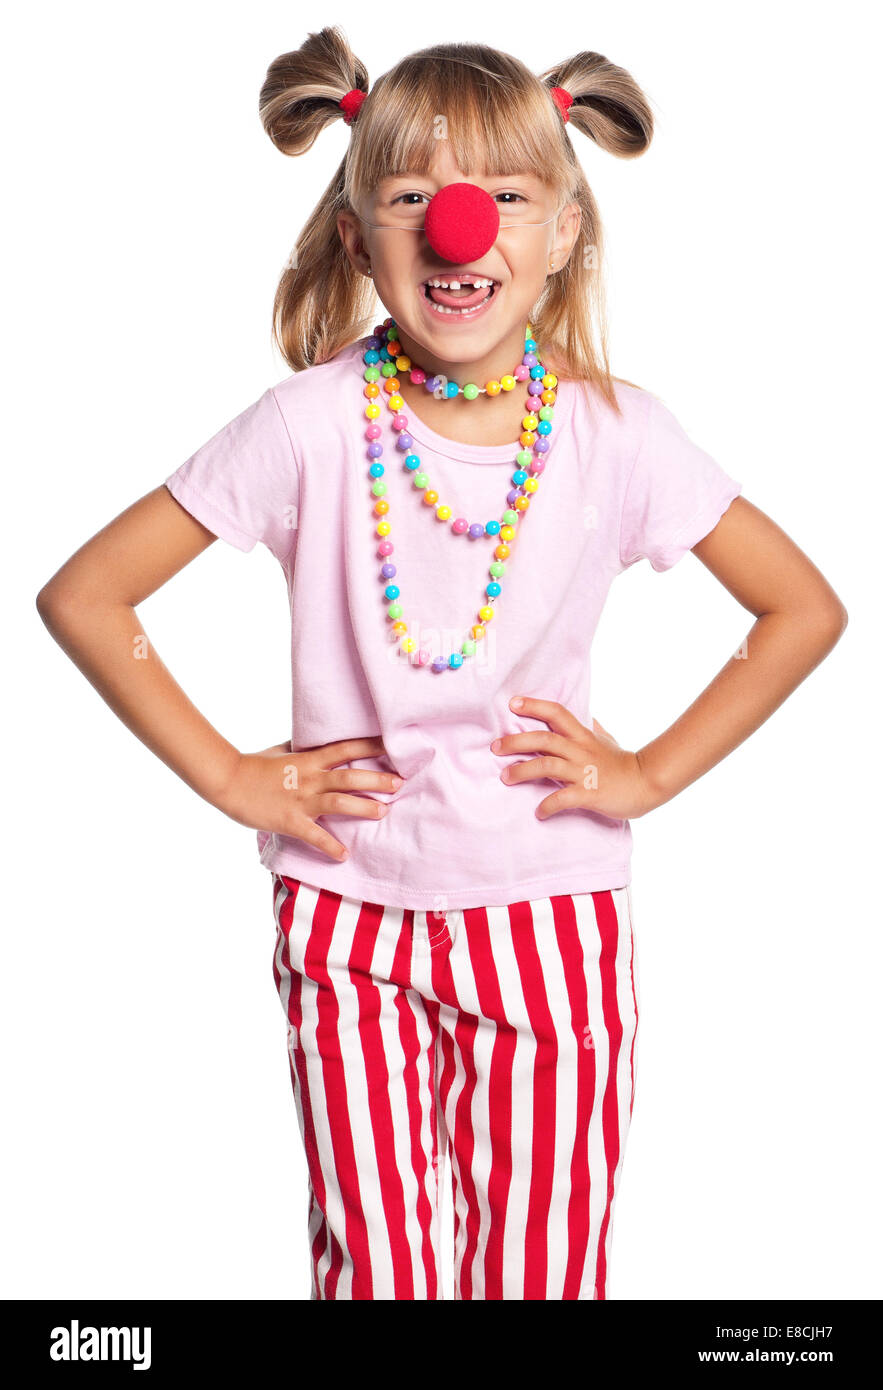 Little girl with clown nose Stock Photo